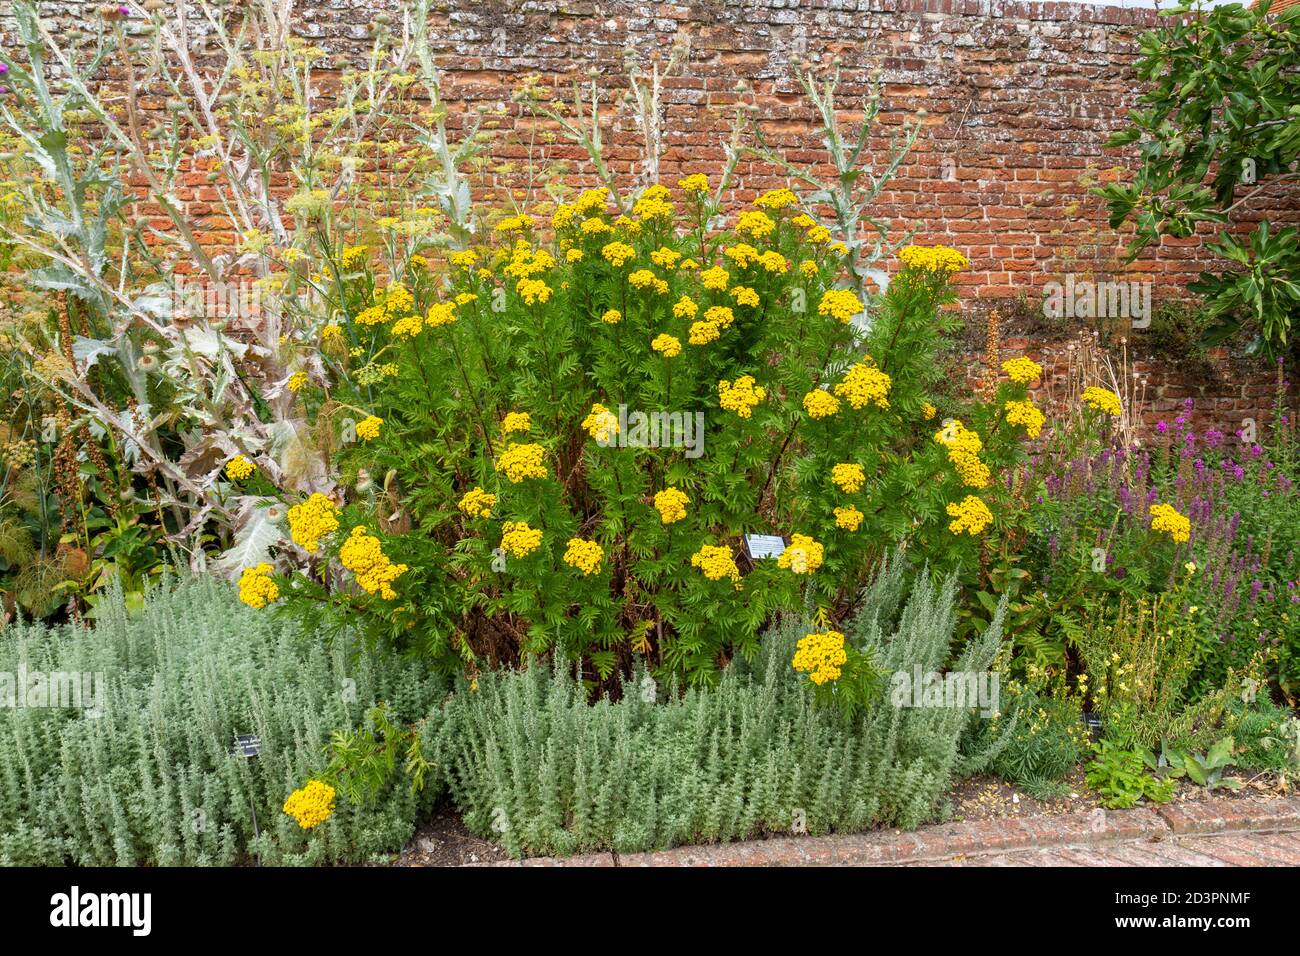 Tansy (Tanacetum vulgare) is a perennial, herbaceous flowering plant in the Tudor walled garden, Cressing Temple Barns, Essex, UK. Stock Photo